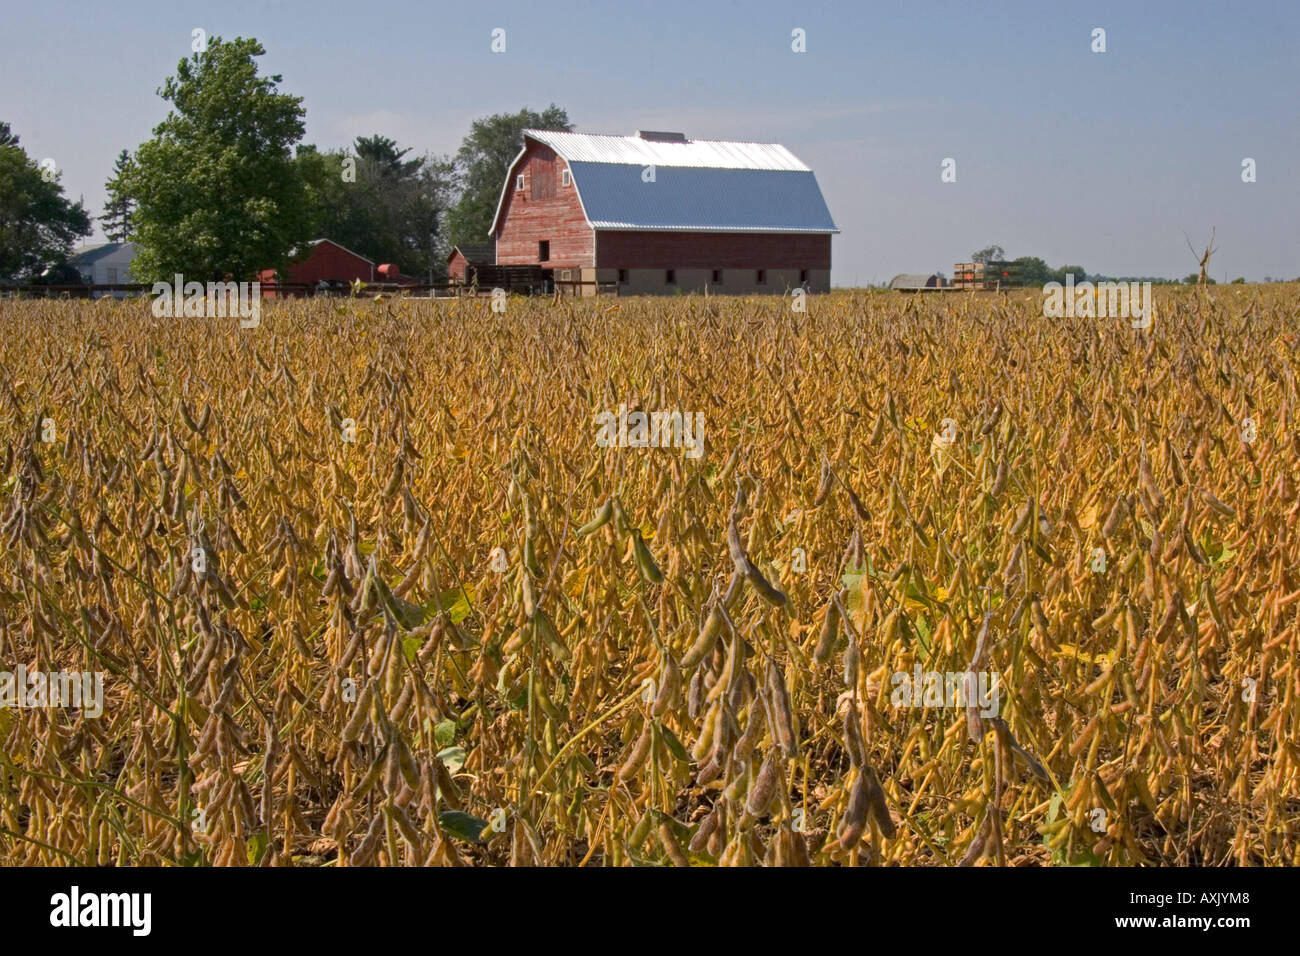 Red barn and soy bean crop in Ladd Illinois Stock Photo